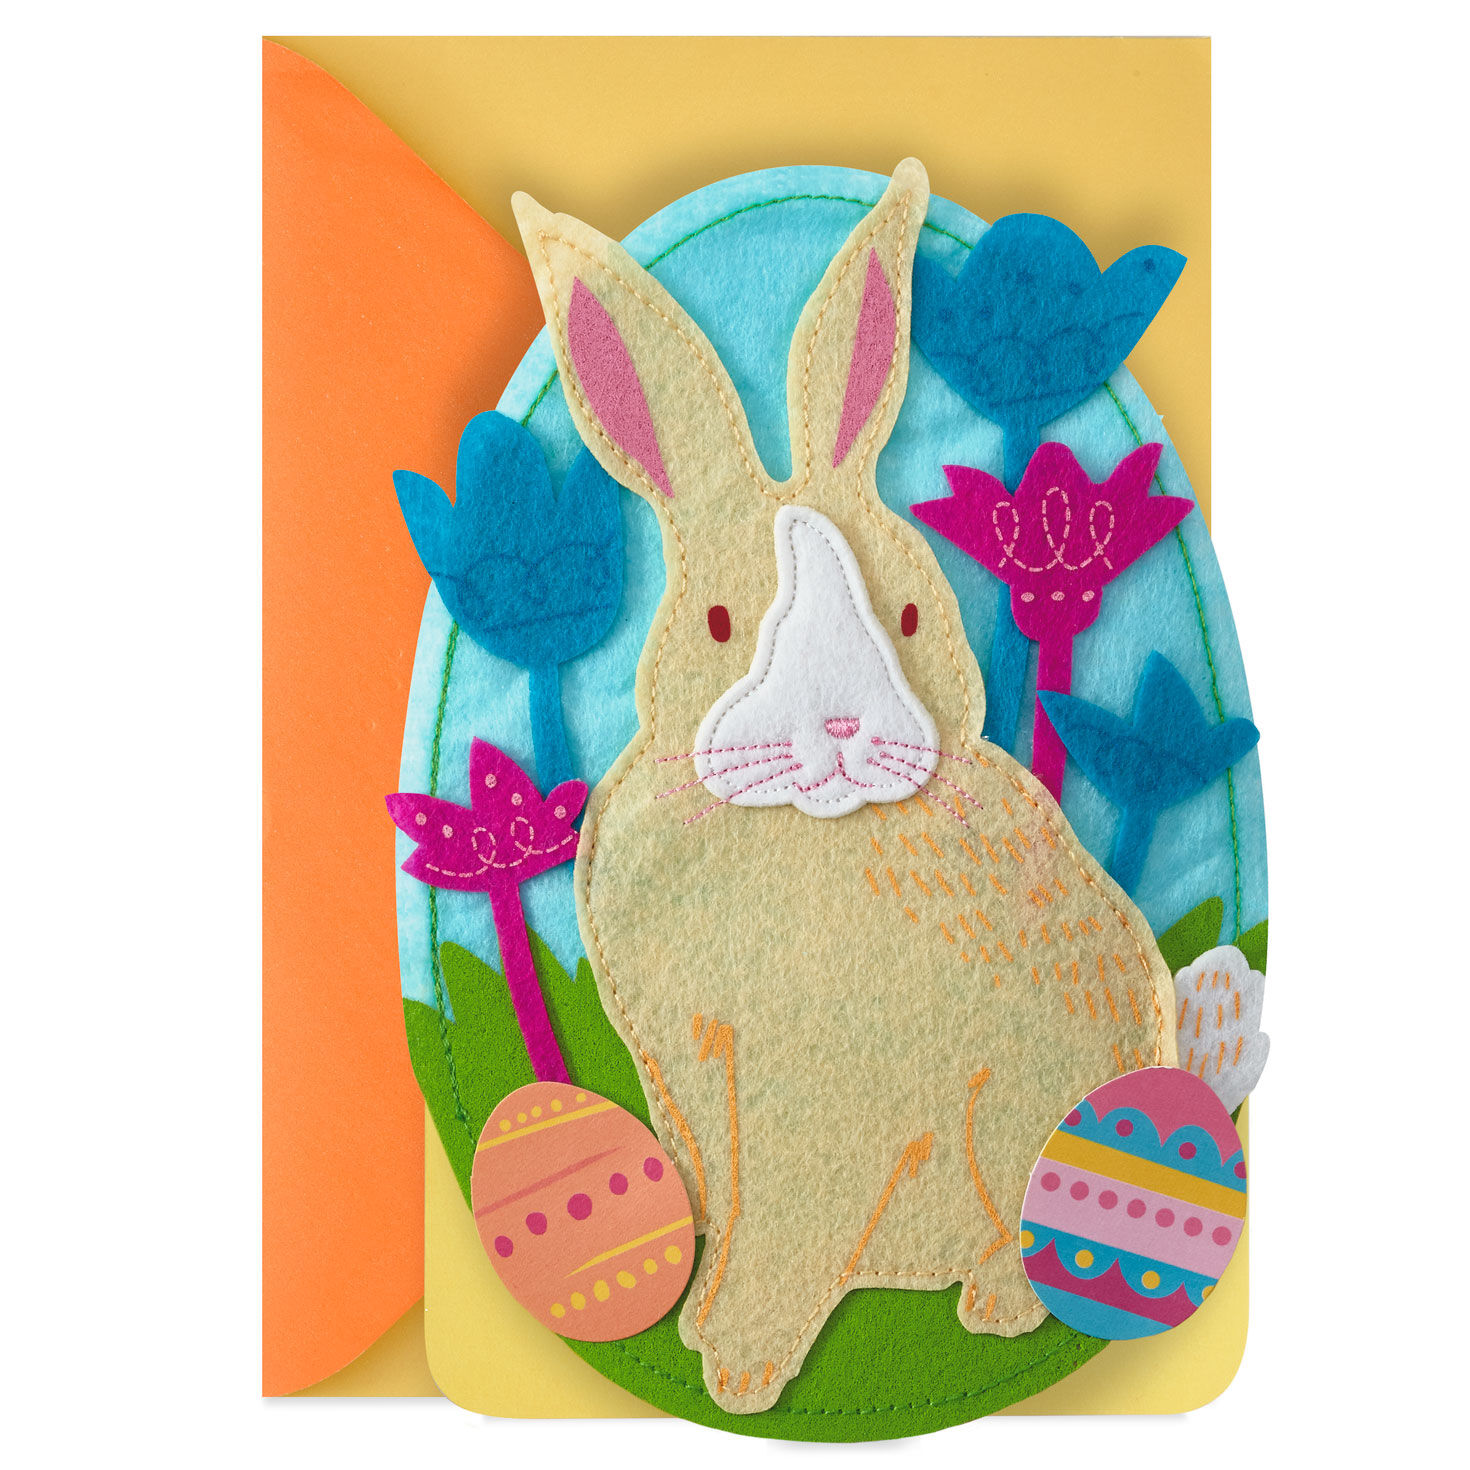 Details about   Hallmark "There's A Very Special Girl..."  Easter Greeting Card USA 